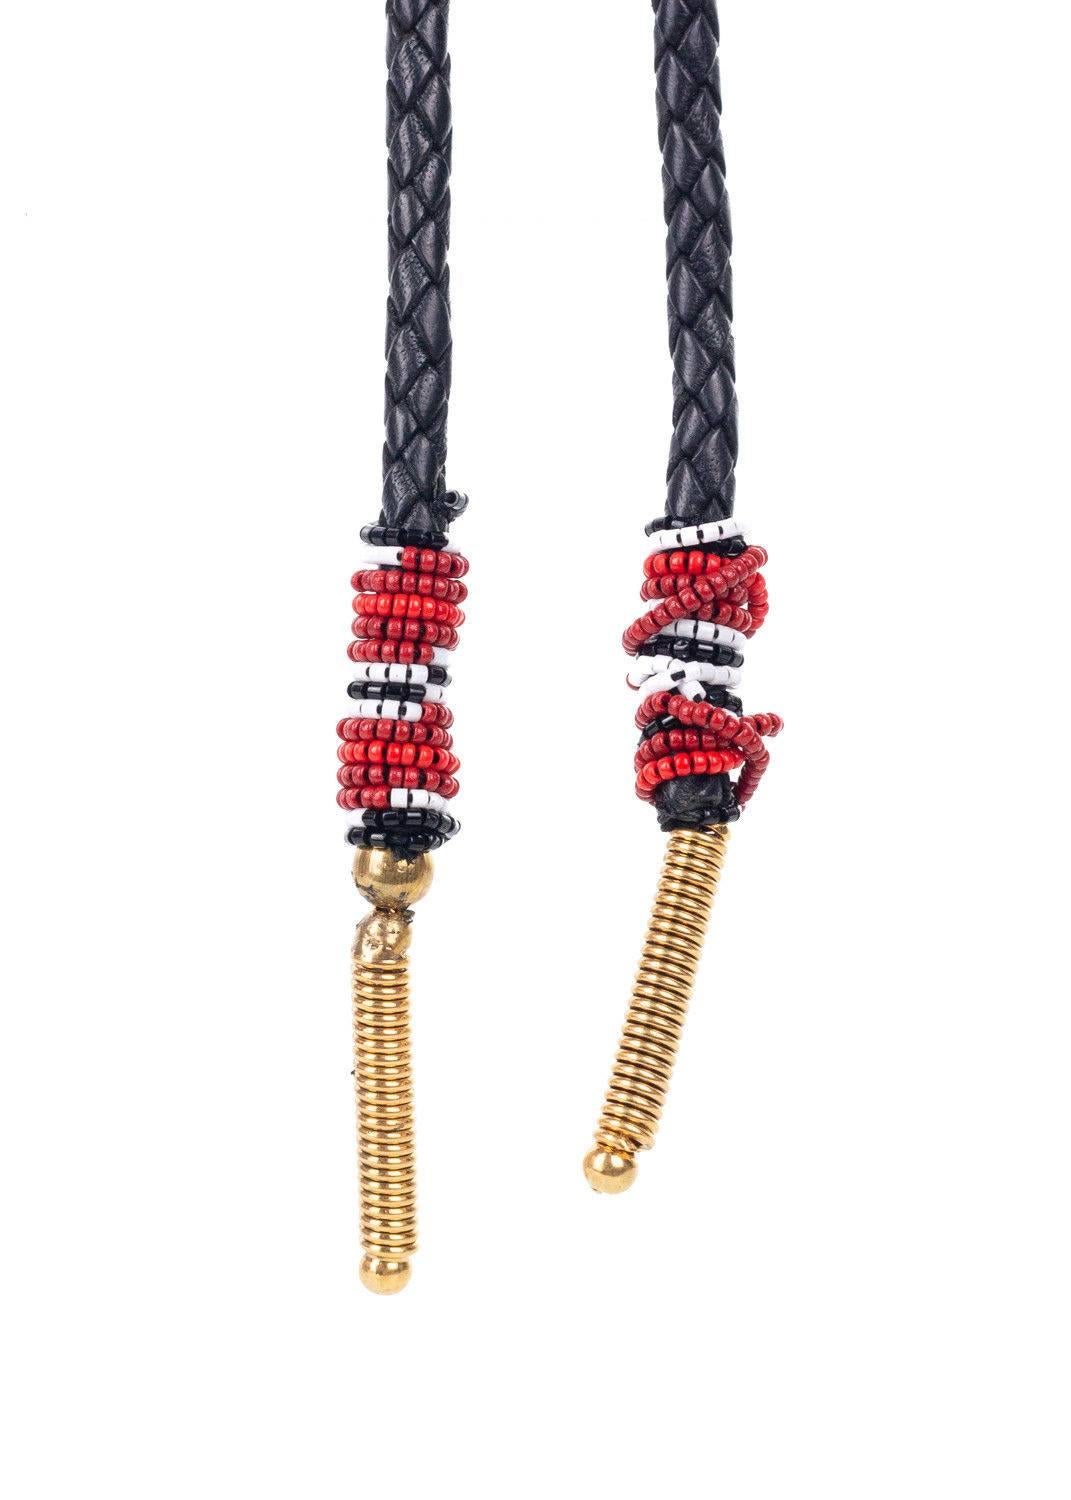 Get your Roberto Cavalli Necklace for the western style decadence. This necklace features a black leather braided chain, smooth black stone embellished gold pendant, and cultural micro beaded gold tipped tassels. You can pair this necklace with a